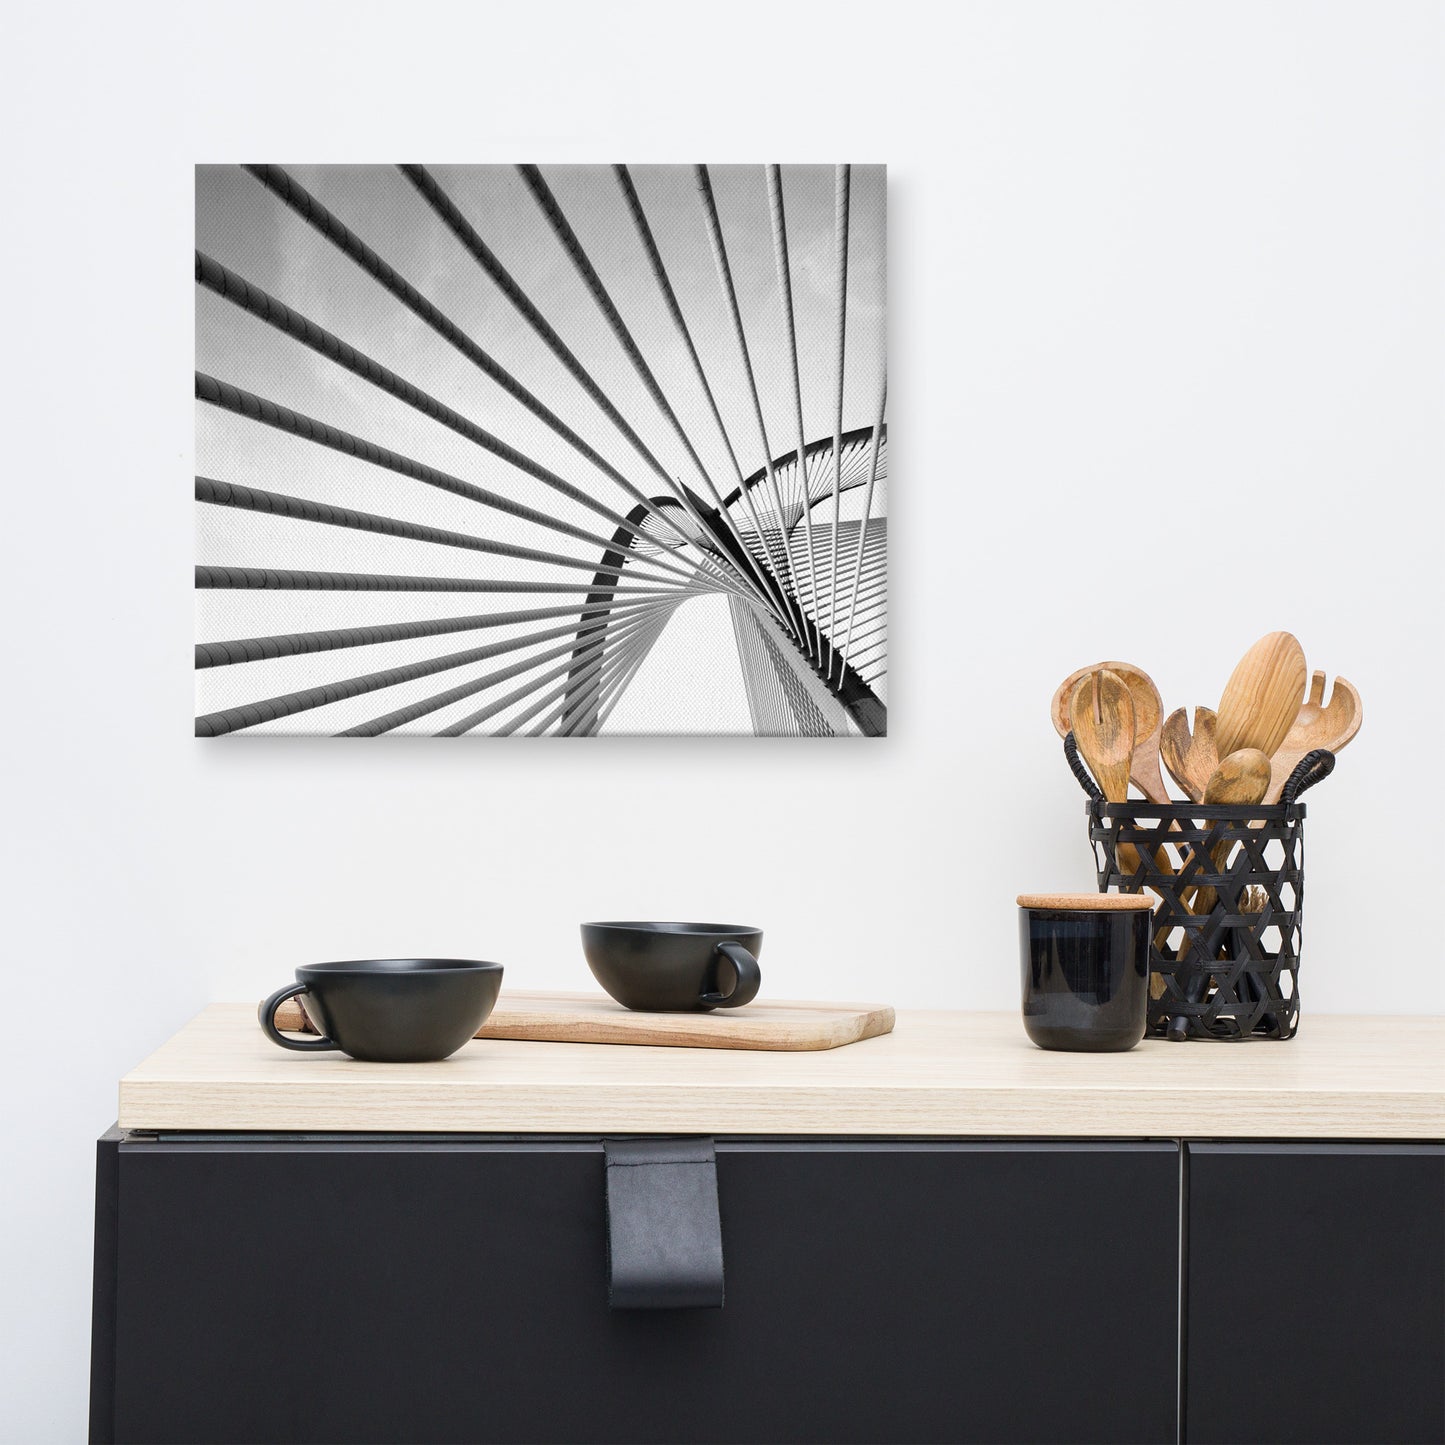 Convergence Black and White Architectural Photograph Canvas Wall Art Print